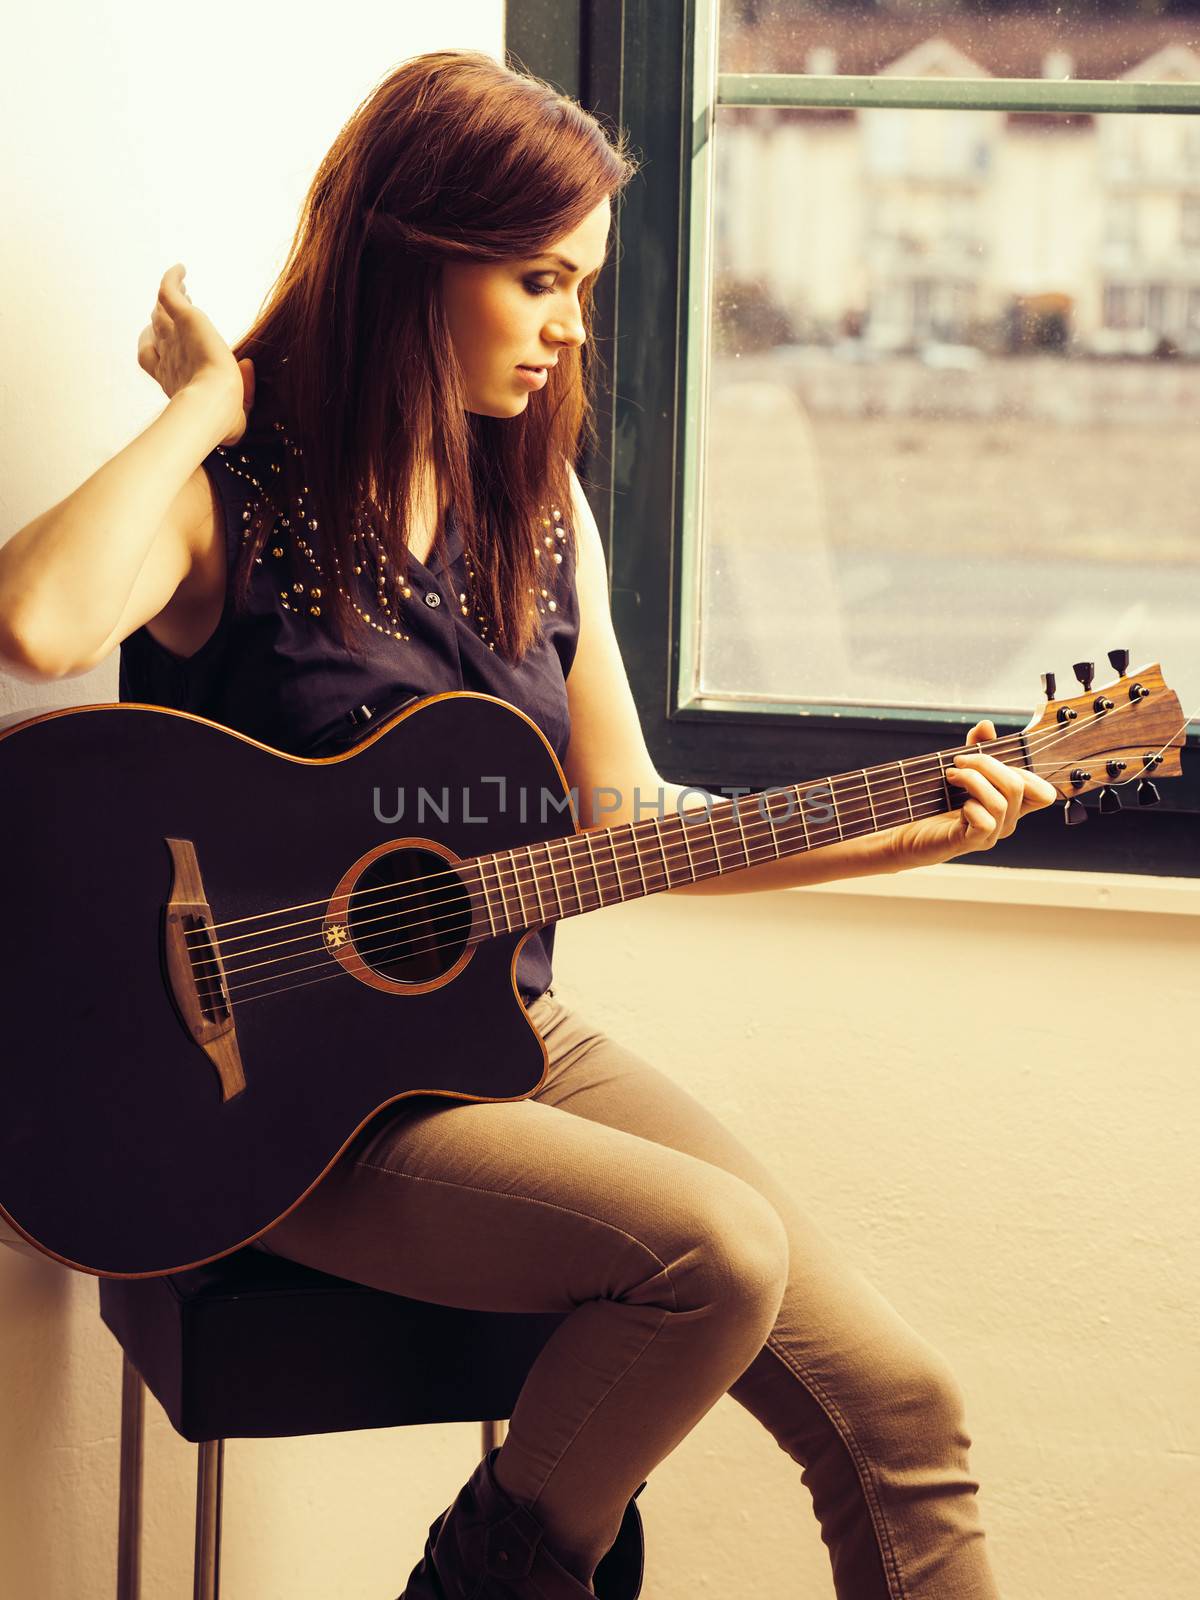 Photo of a woman playing an acoustic guitar while sitting by a window.